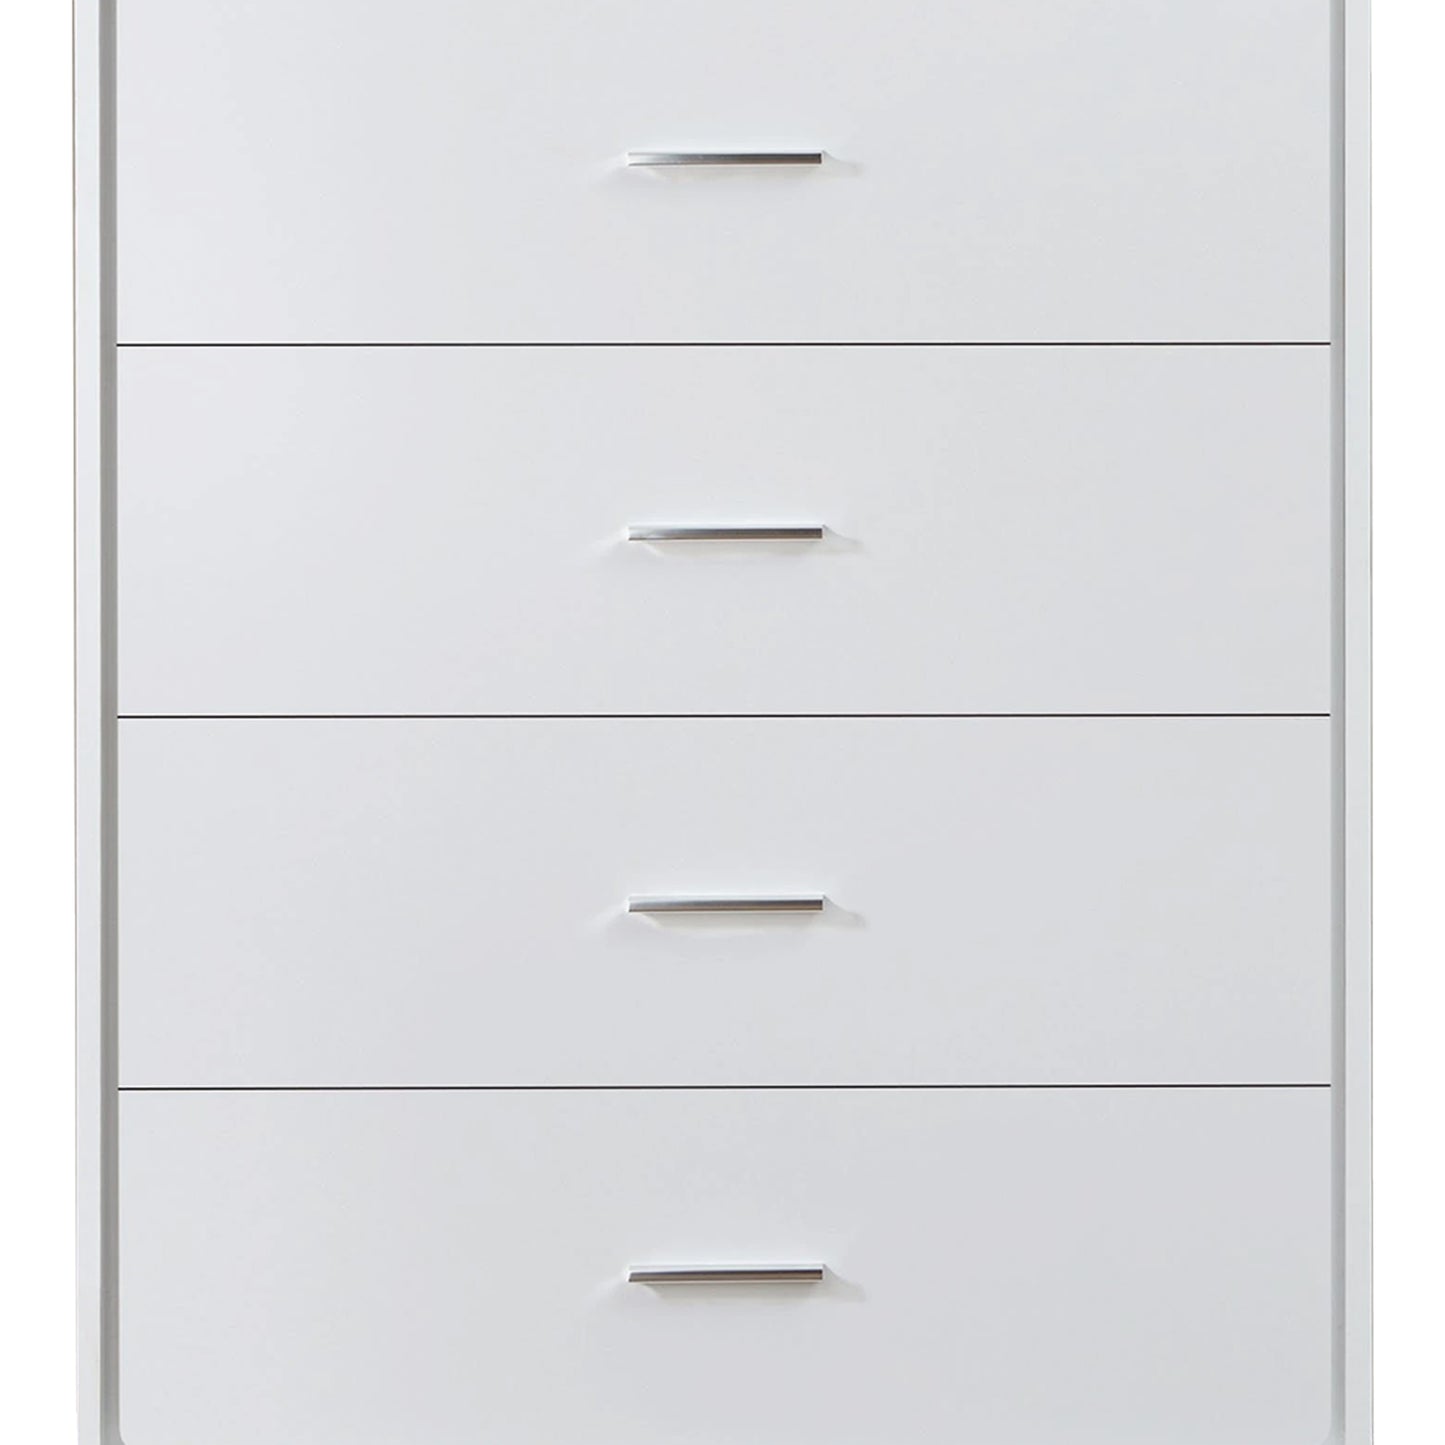 Contemporary Style Wooden Chest with Five Drawers, White - AMF-97364